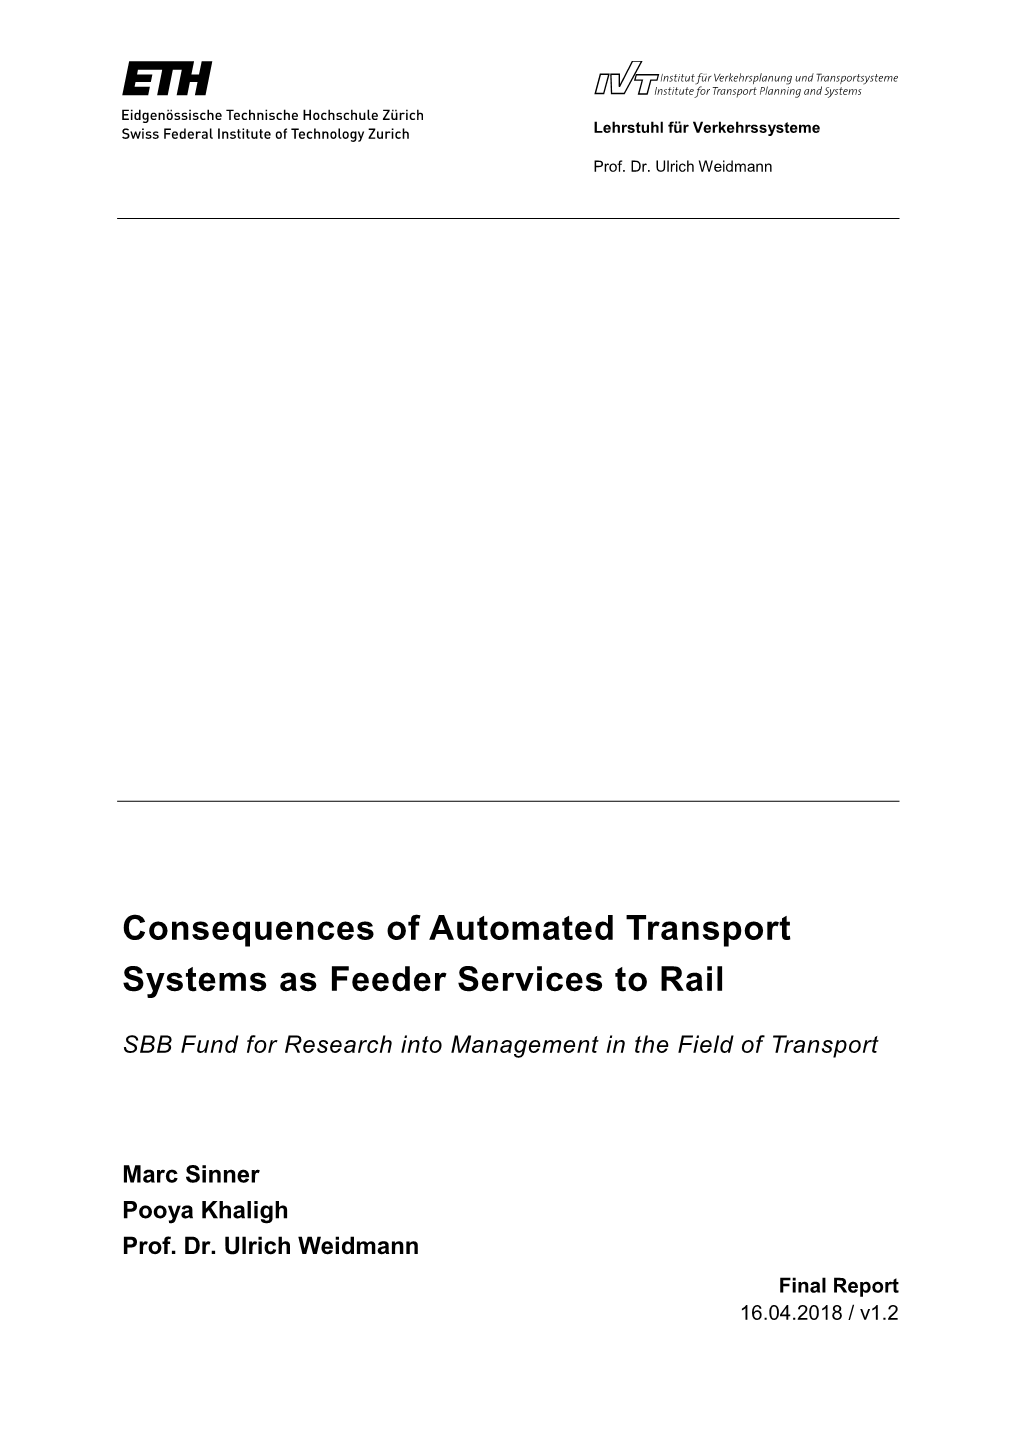 Consequences of Automated Transport Systems As Feeder Services to Rail